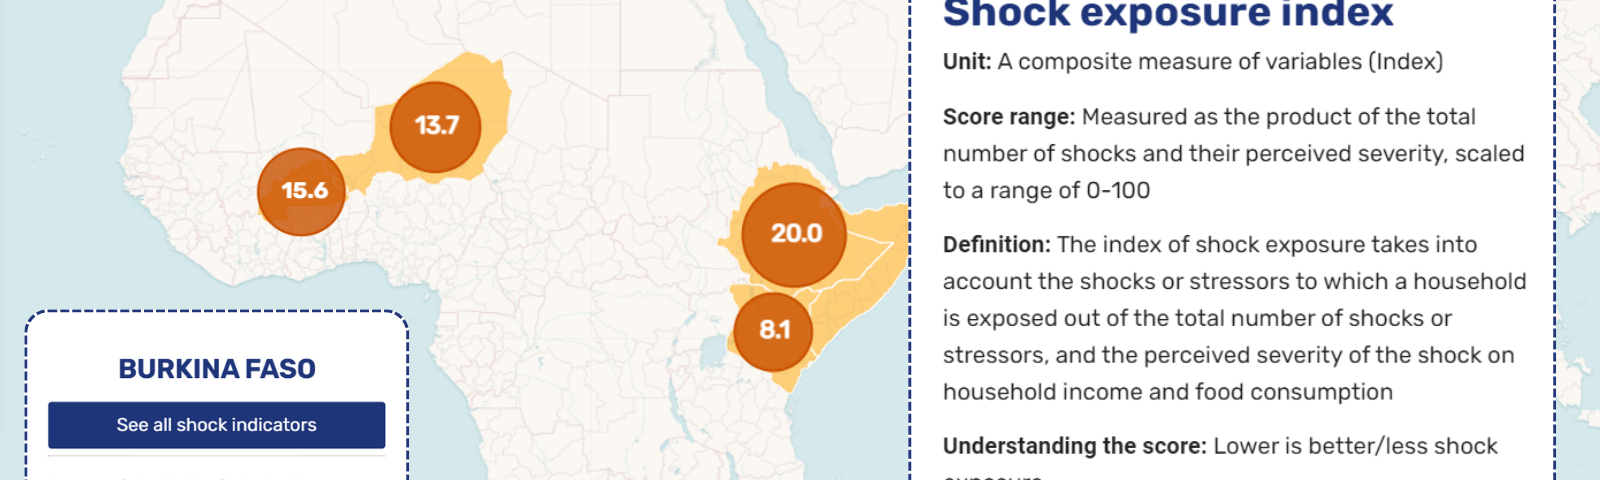 A map of Africa with Burkina Faso, Niger, Ethiopia, Somalia, and Uganda highlighted. Burkina Faso is selected and you can see the indicators associated with shock and stressors. You also see information about the Shock Exposure index.